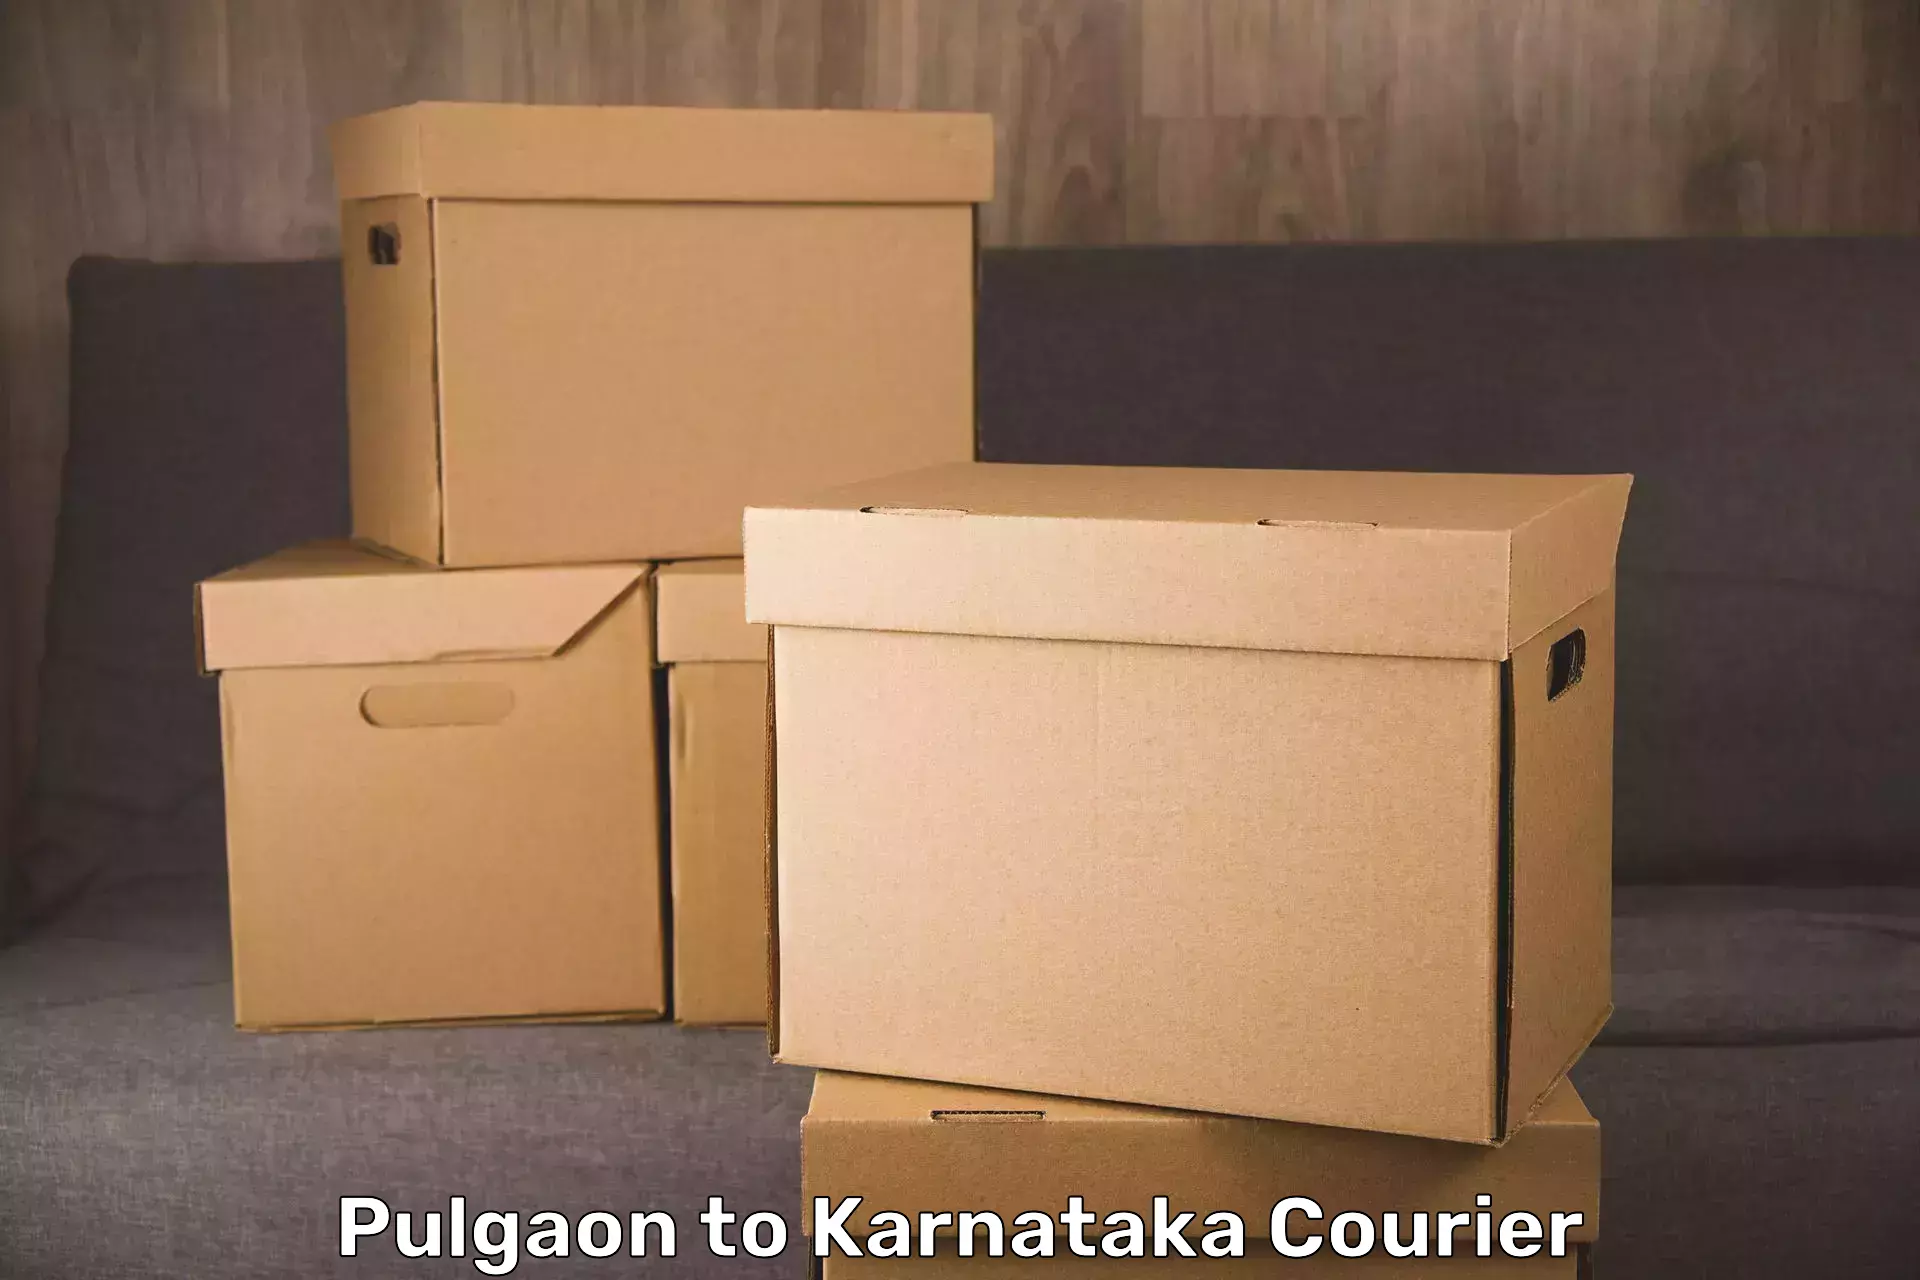 Luggage delivery providers Pulgaon to Bangalore